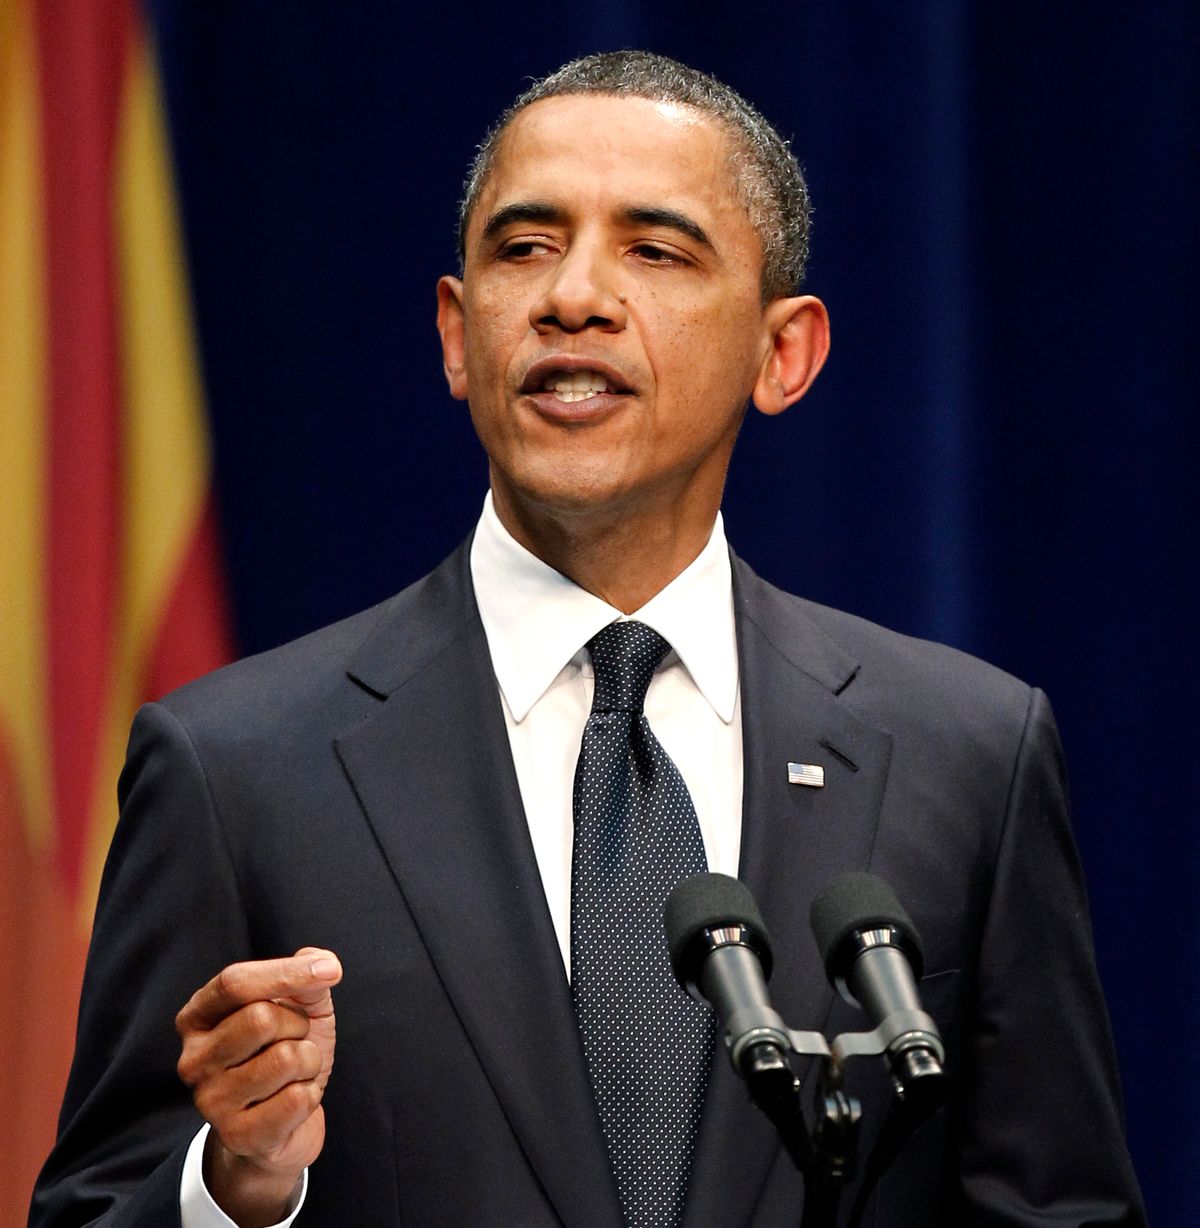 President Barack Obama speaks at a memorial service for the victims of Saturday's shootings at McKale Center on the University of Arizona campus Wednesday, Jan. 12, 2011, in Tucson, Ariz. (AP Photo/Chris Carlson) (Associated Press)